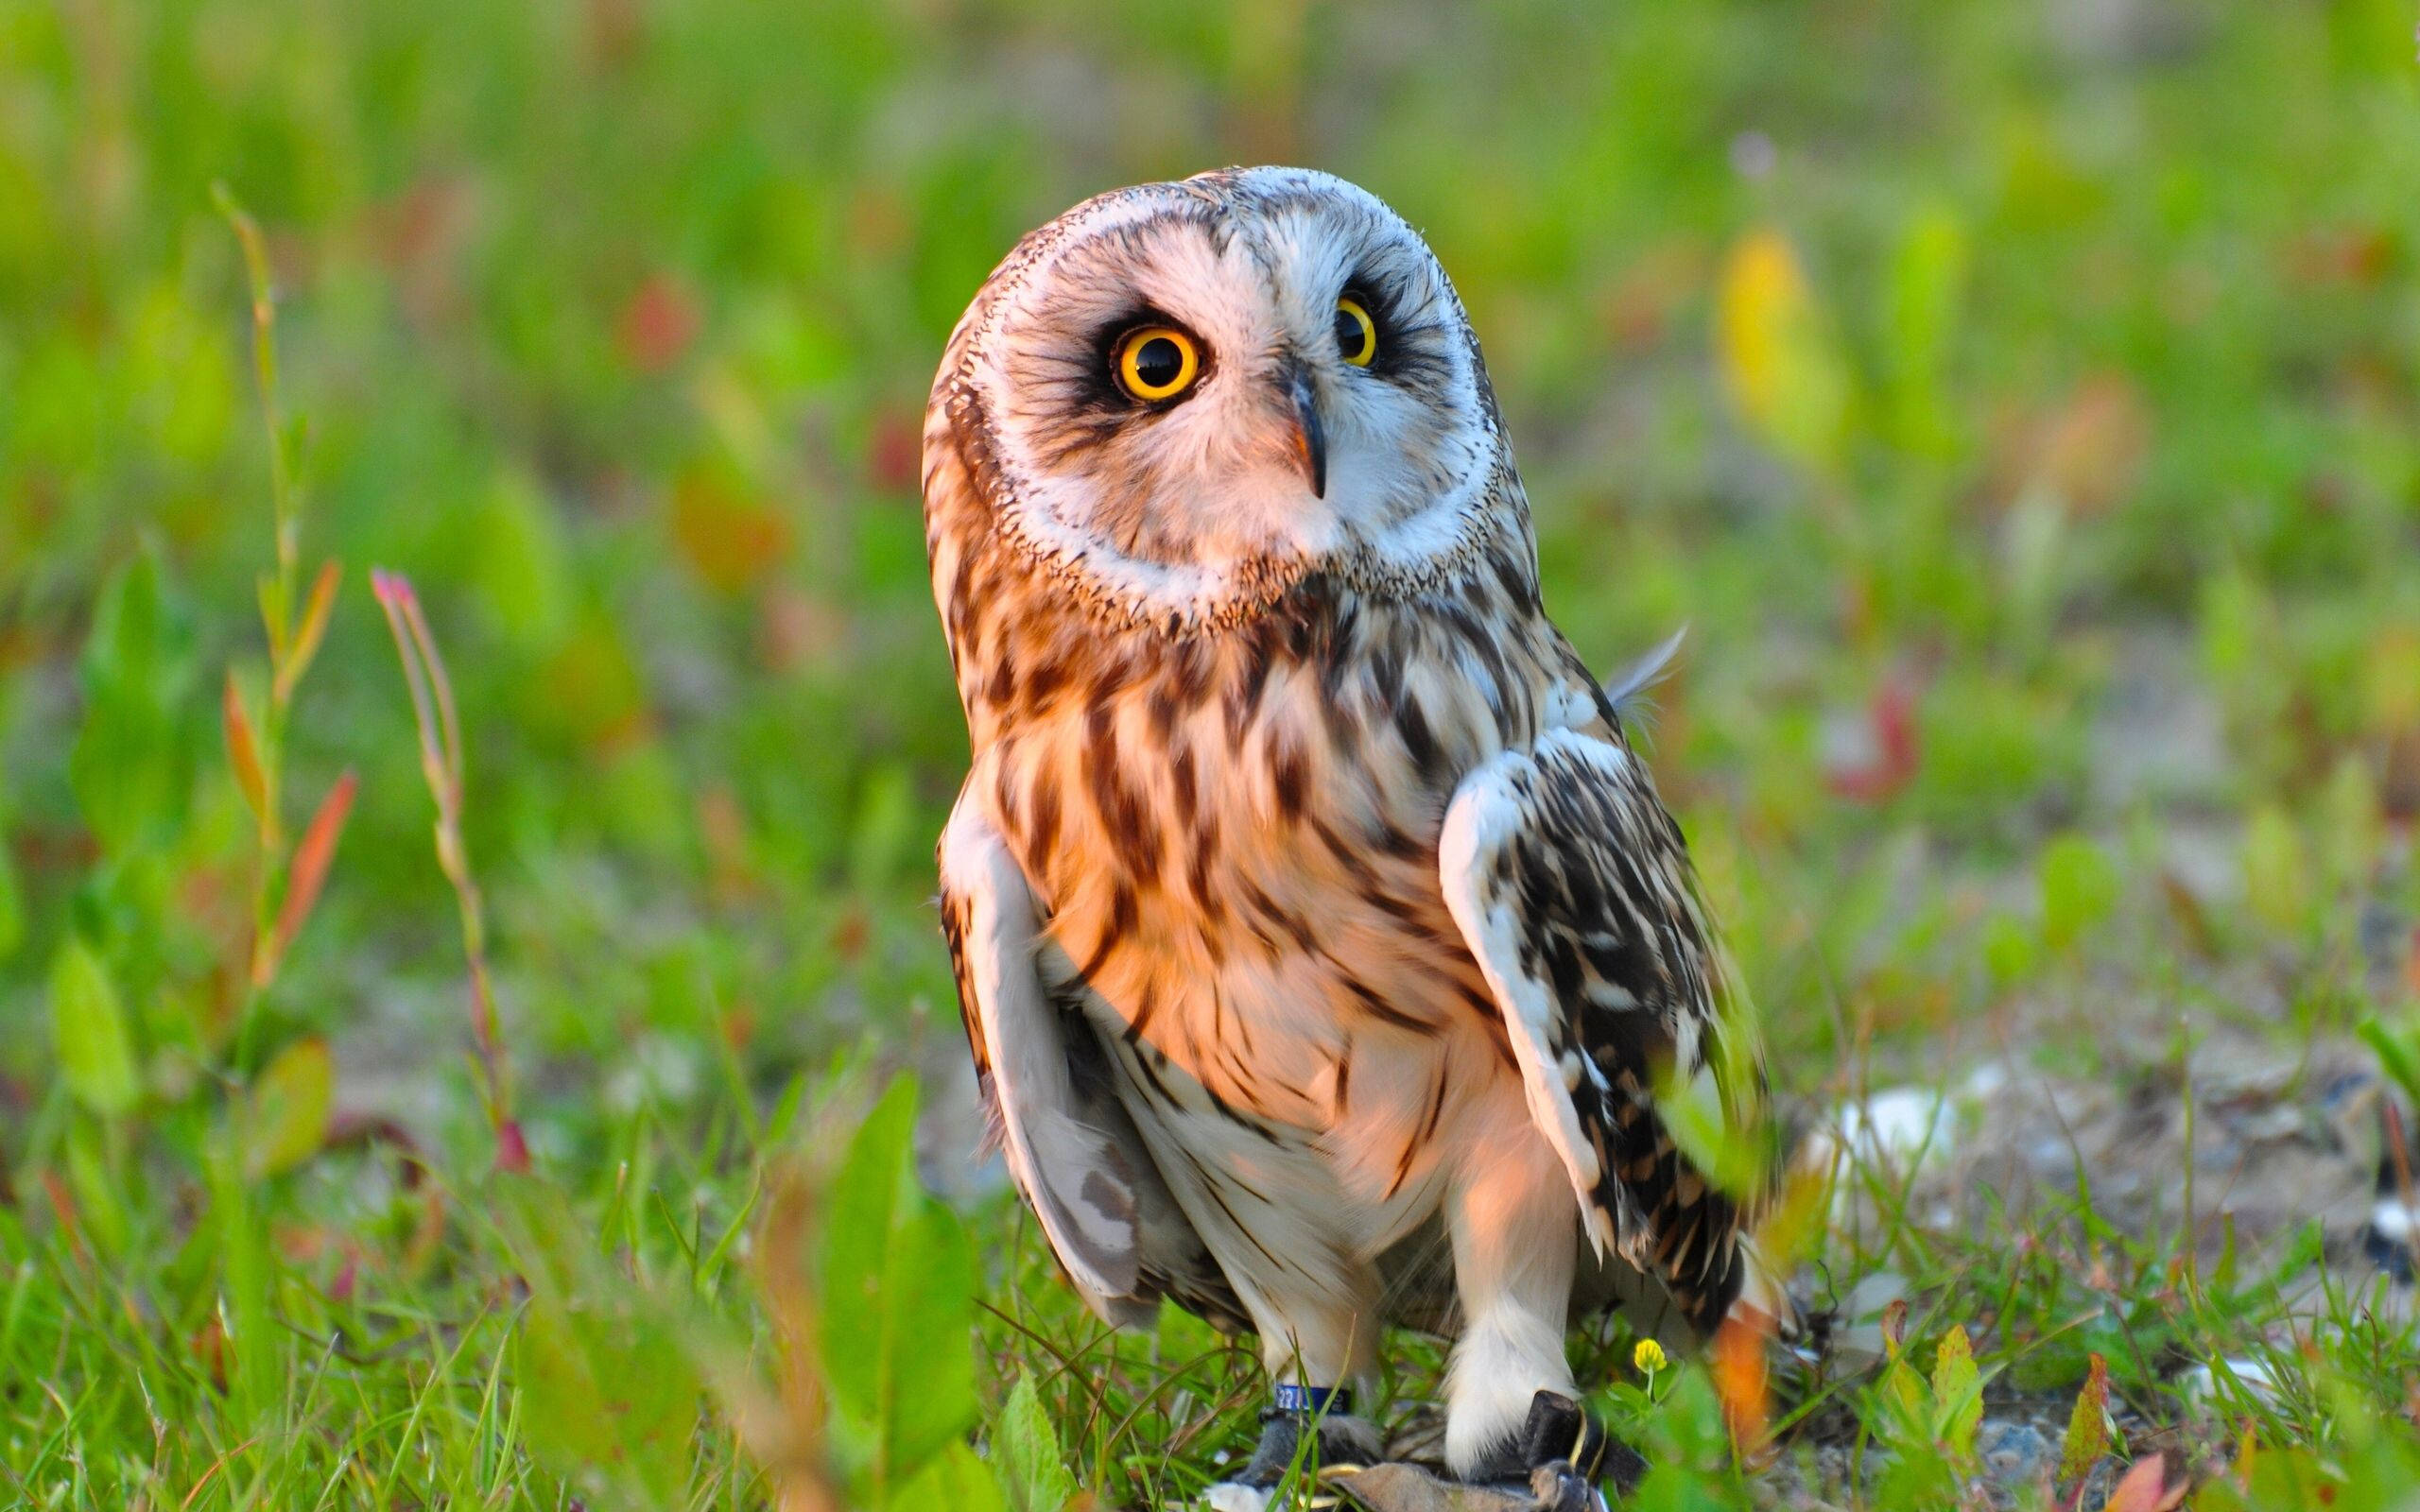 Cute Baby Owl On Grass Background